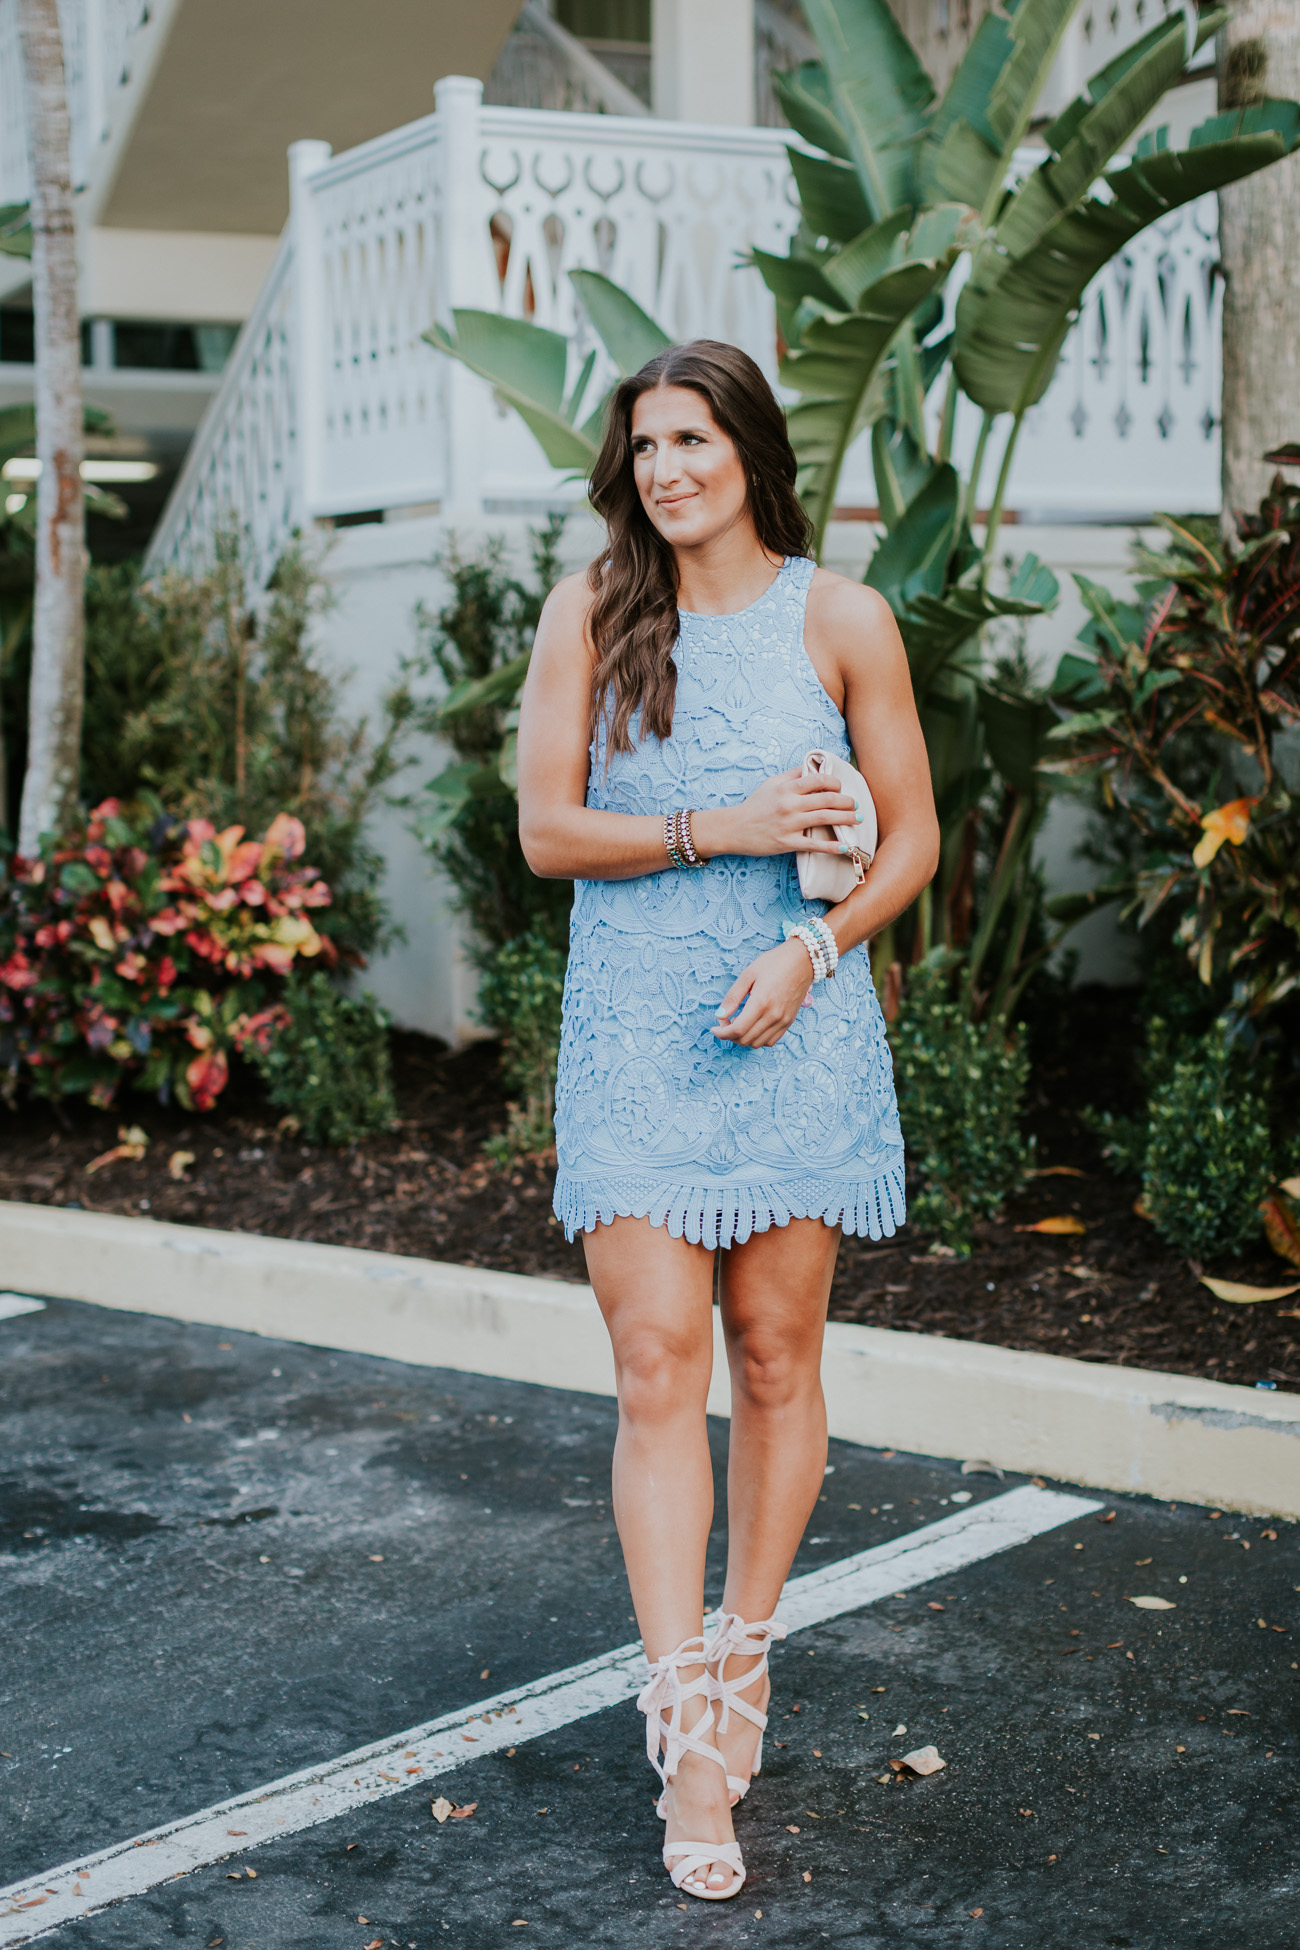 caspian shift dress, lovers and friends caspian dress, vacation outfit, tassel bracelets, tassel jewelry, free people lace up sandals, free people wrap around sandals, turquoise bracelets, vacation style, beachy outfit // grace wainwright a southern drawl